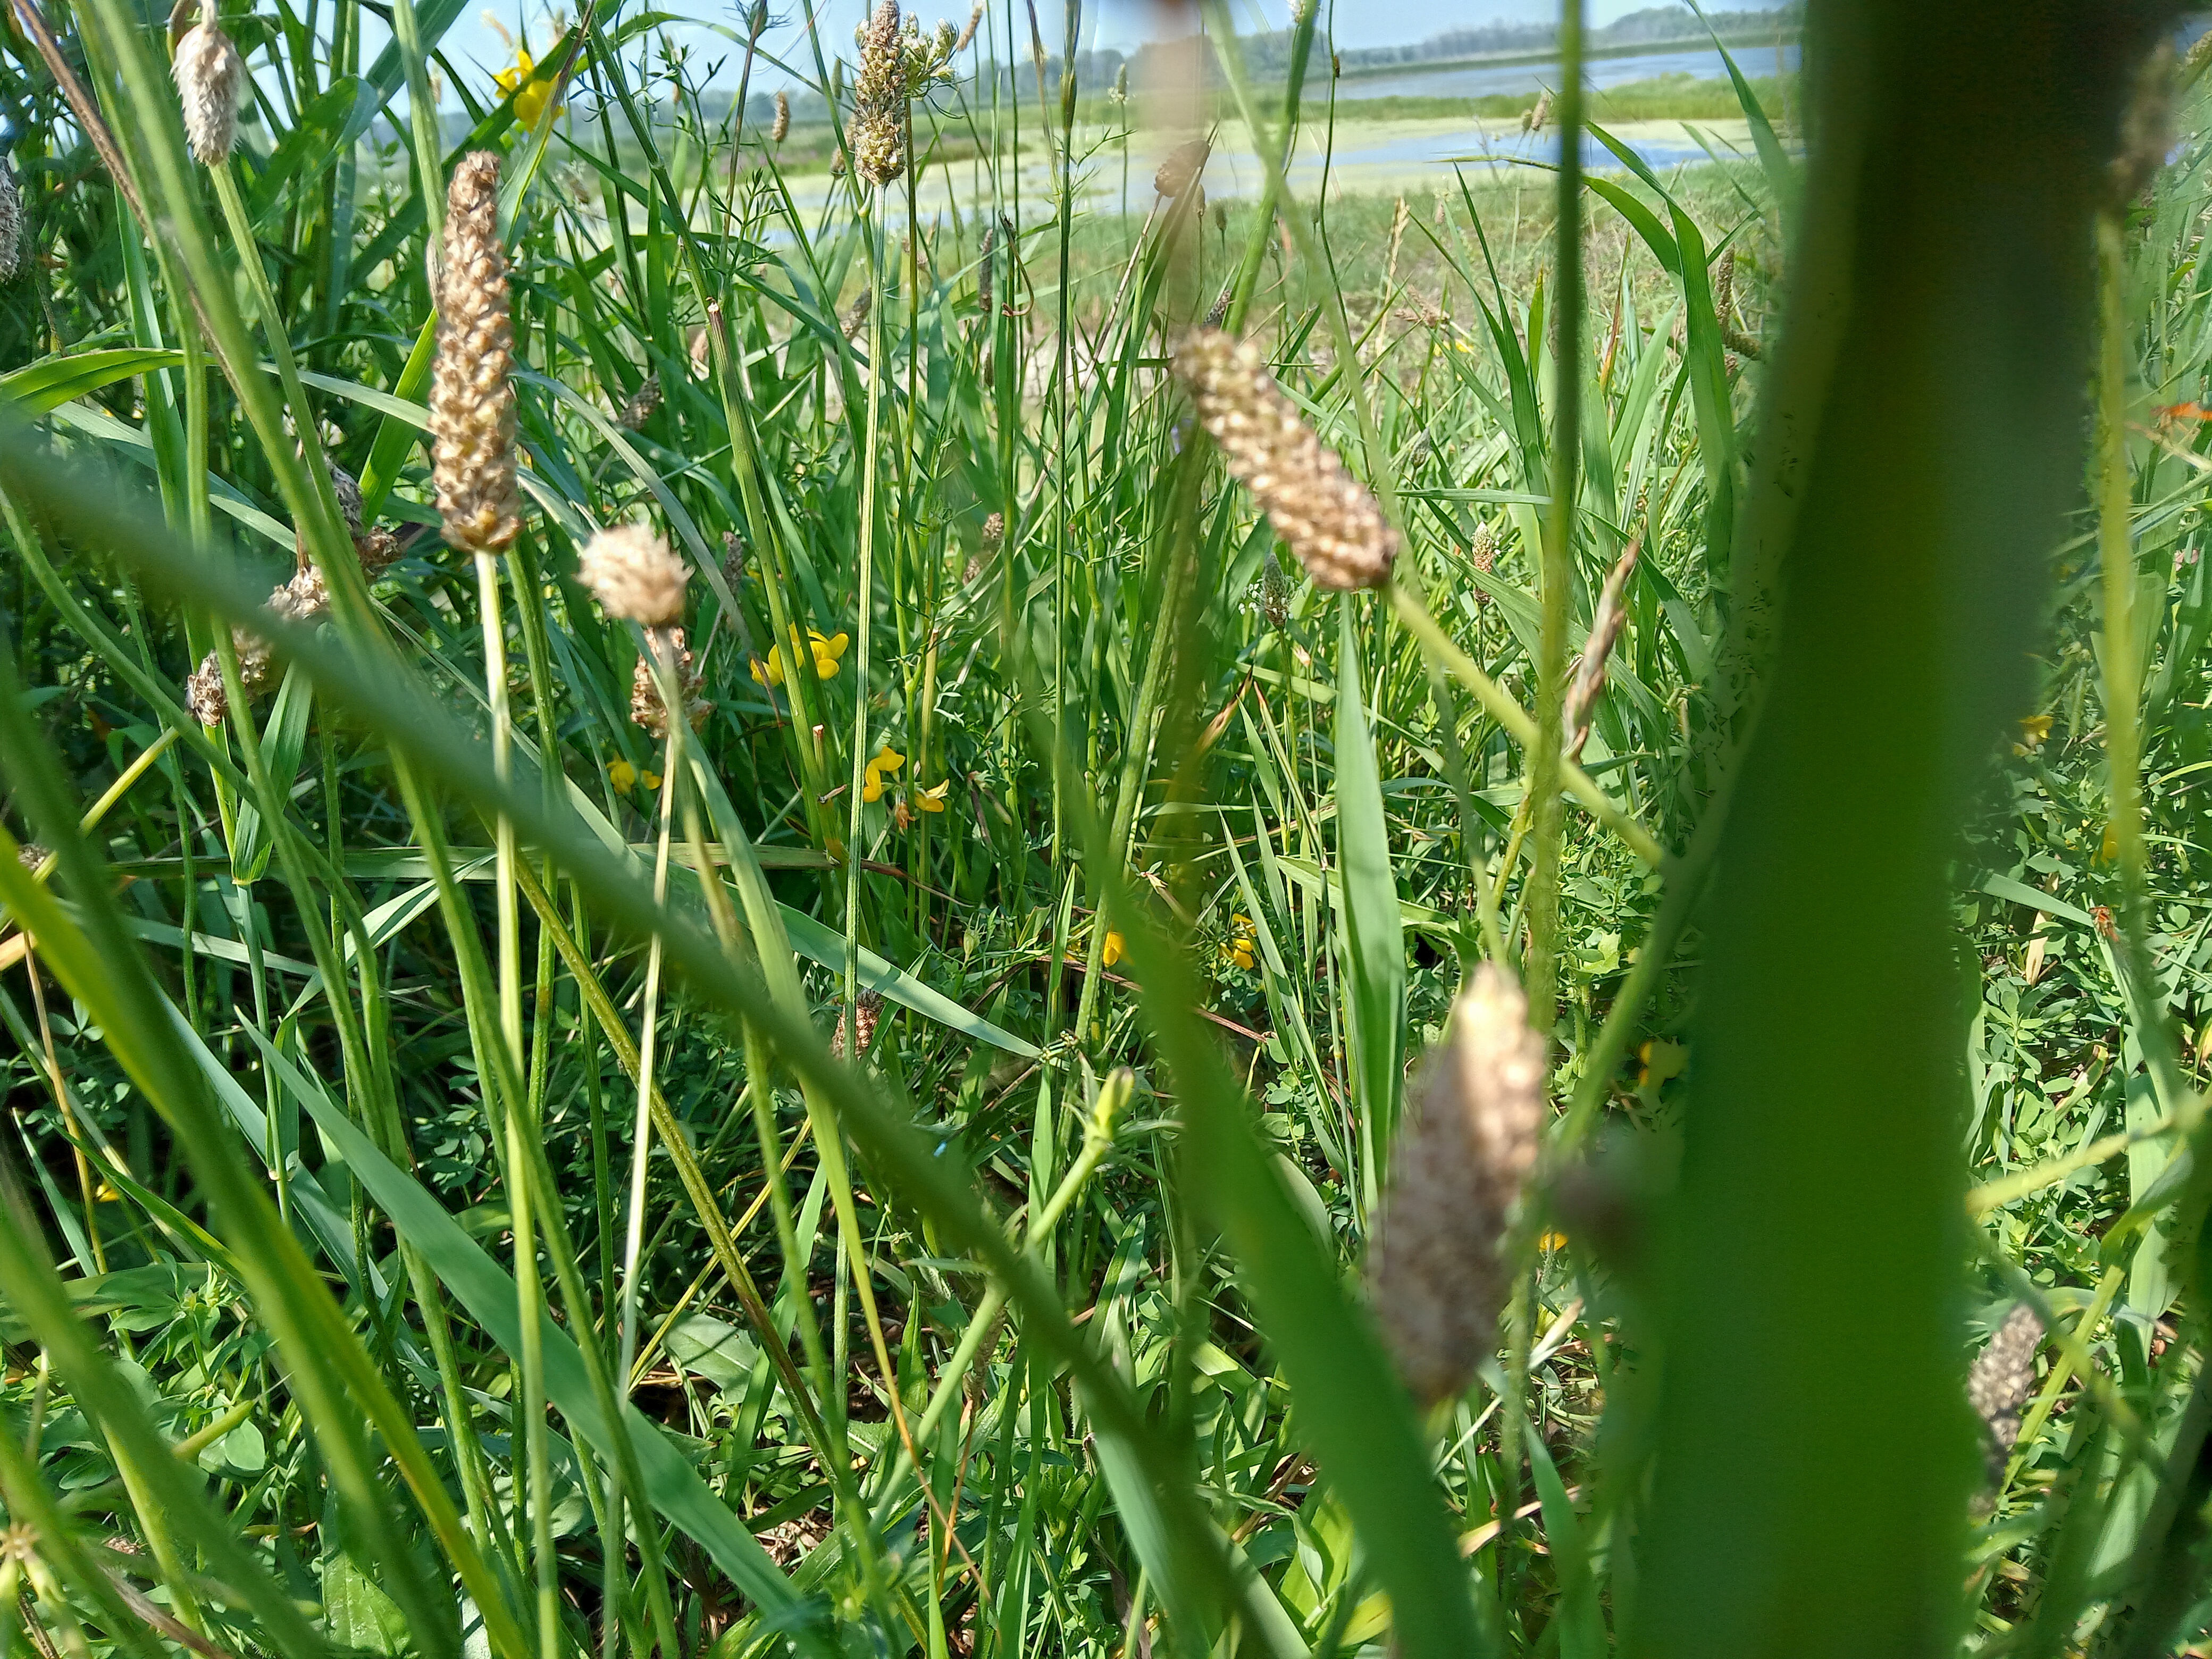 A photo of a field of tall grass, with water in the distance.